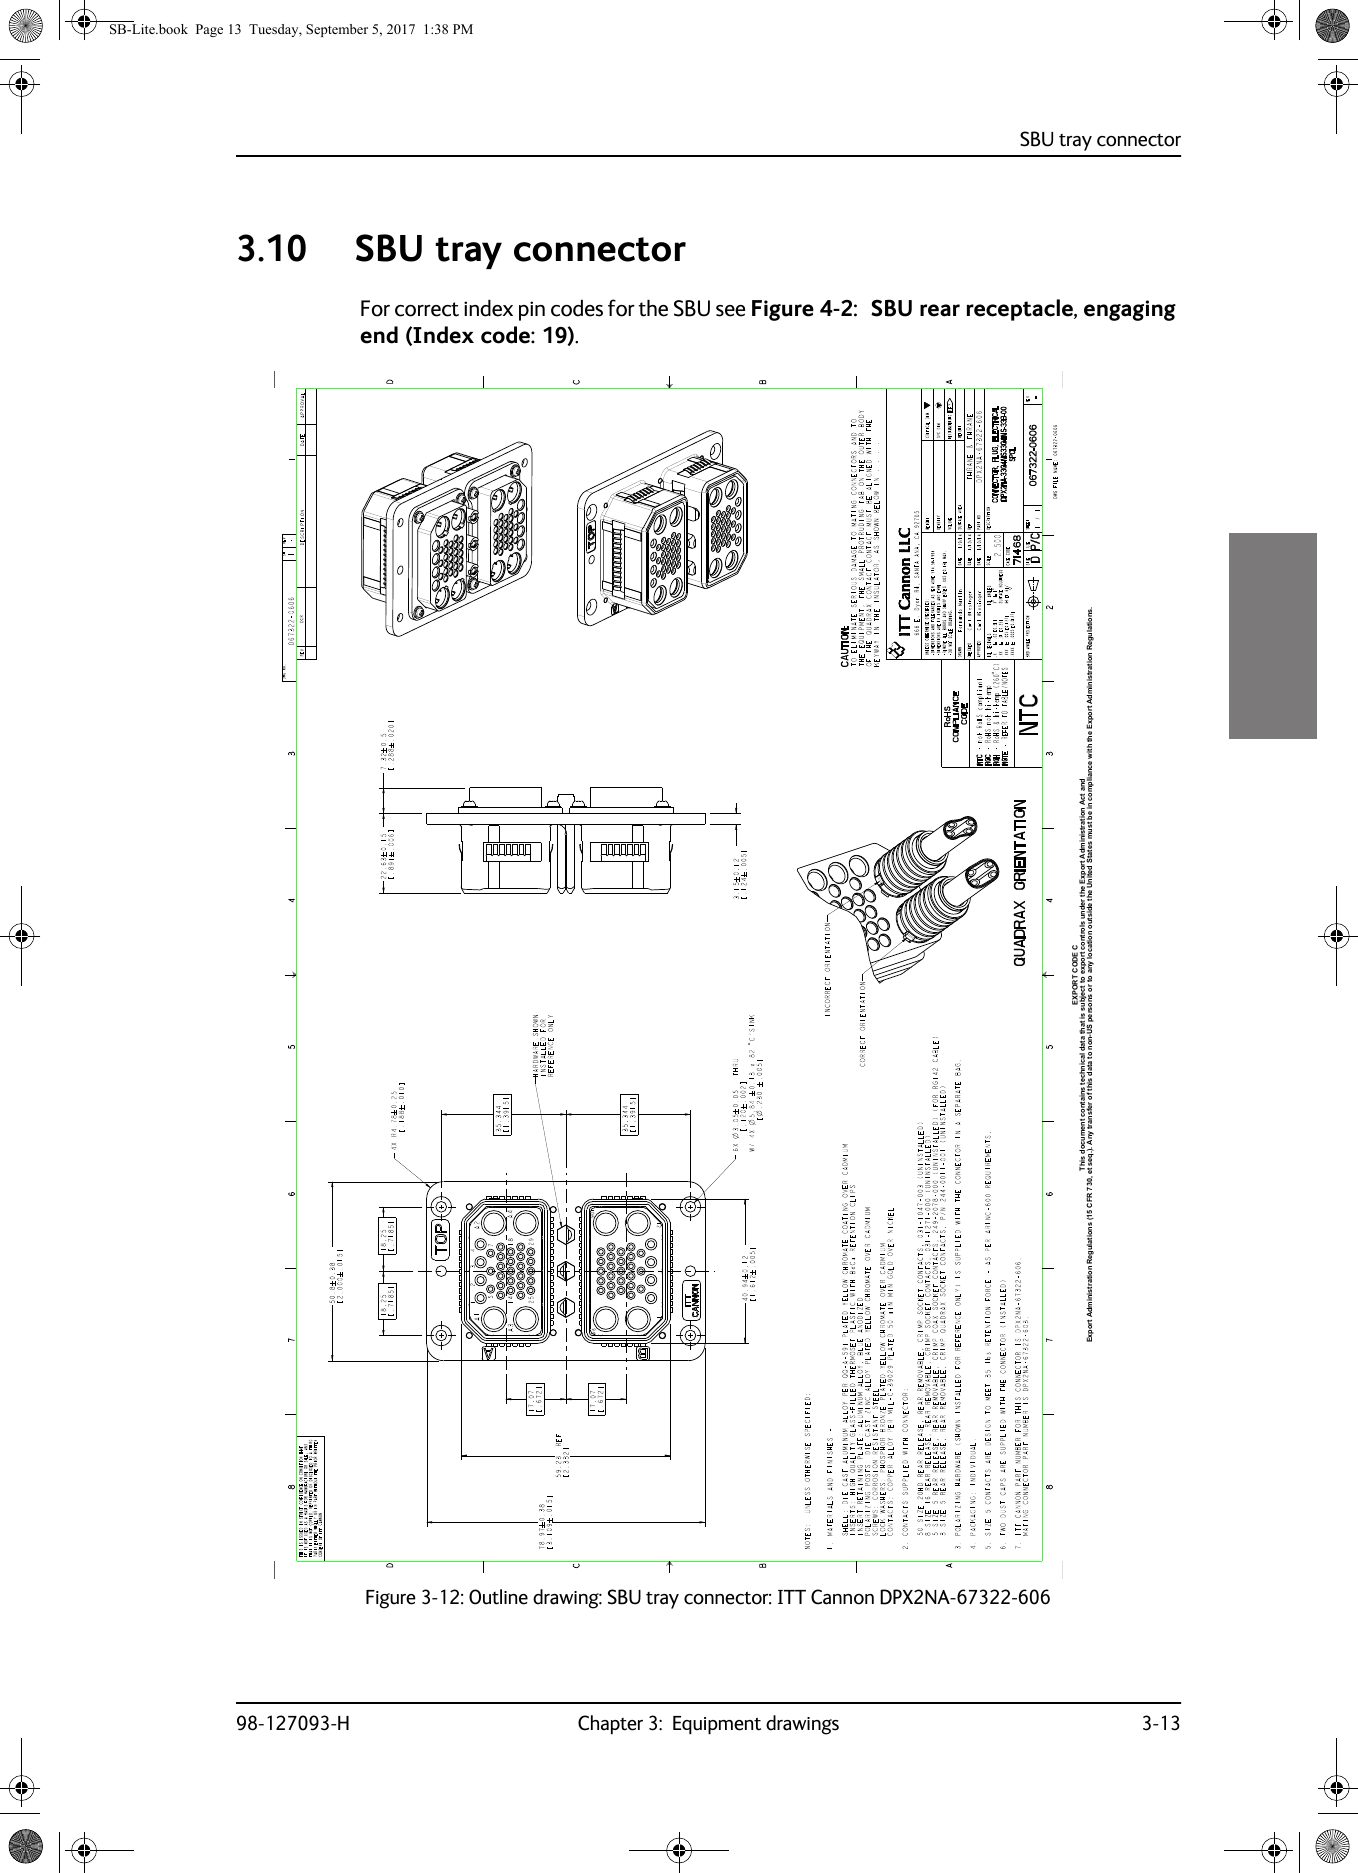 SBU tray connector98-127093-H Chapter 3:  Equipment drawings 3-1333333.10 SBU tray connectorFor correct index pin codes for the SBU see Figure 4-2:   SBU rear receptacle, engaging end (Index code: 19).Figure 3-12:  Outline drawing: SBU tray connector: ITT Cannon DPX2NA-67322-606Export Administration Regulations (15 CFR 730, et seq.). Any transfer of this data to non-US persons or to any location outside the United States must be in compliance with the Export Administration Regulations.This document contains technical data that is subject to export controls under the Export Administration Act andEXPORT CODE CSB-Lite.book  Page 13  Tuesday, September 5, 2017  1:38 PM